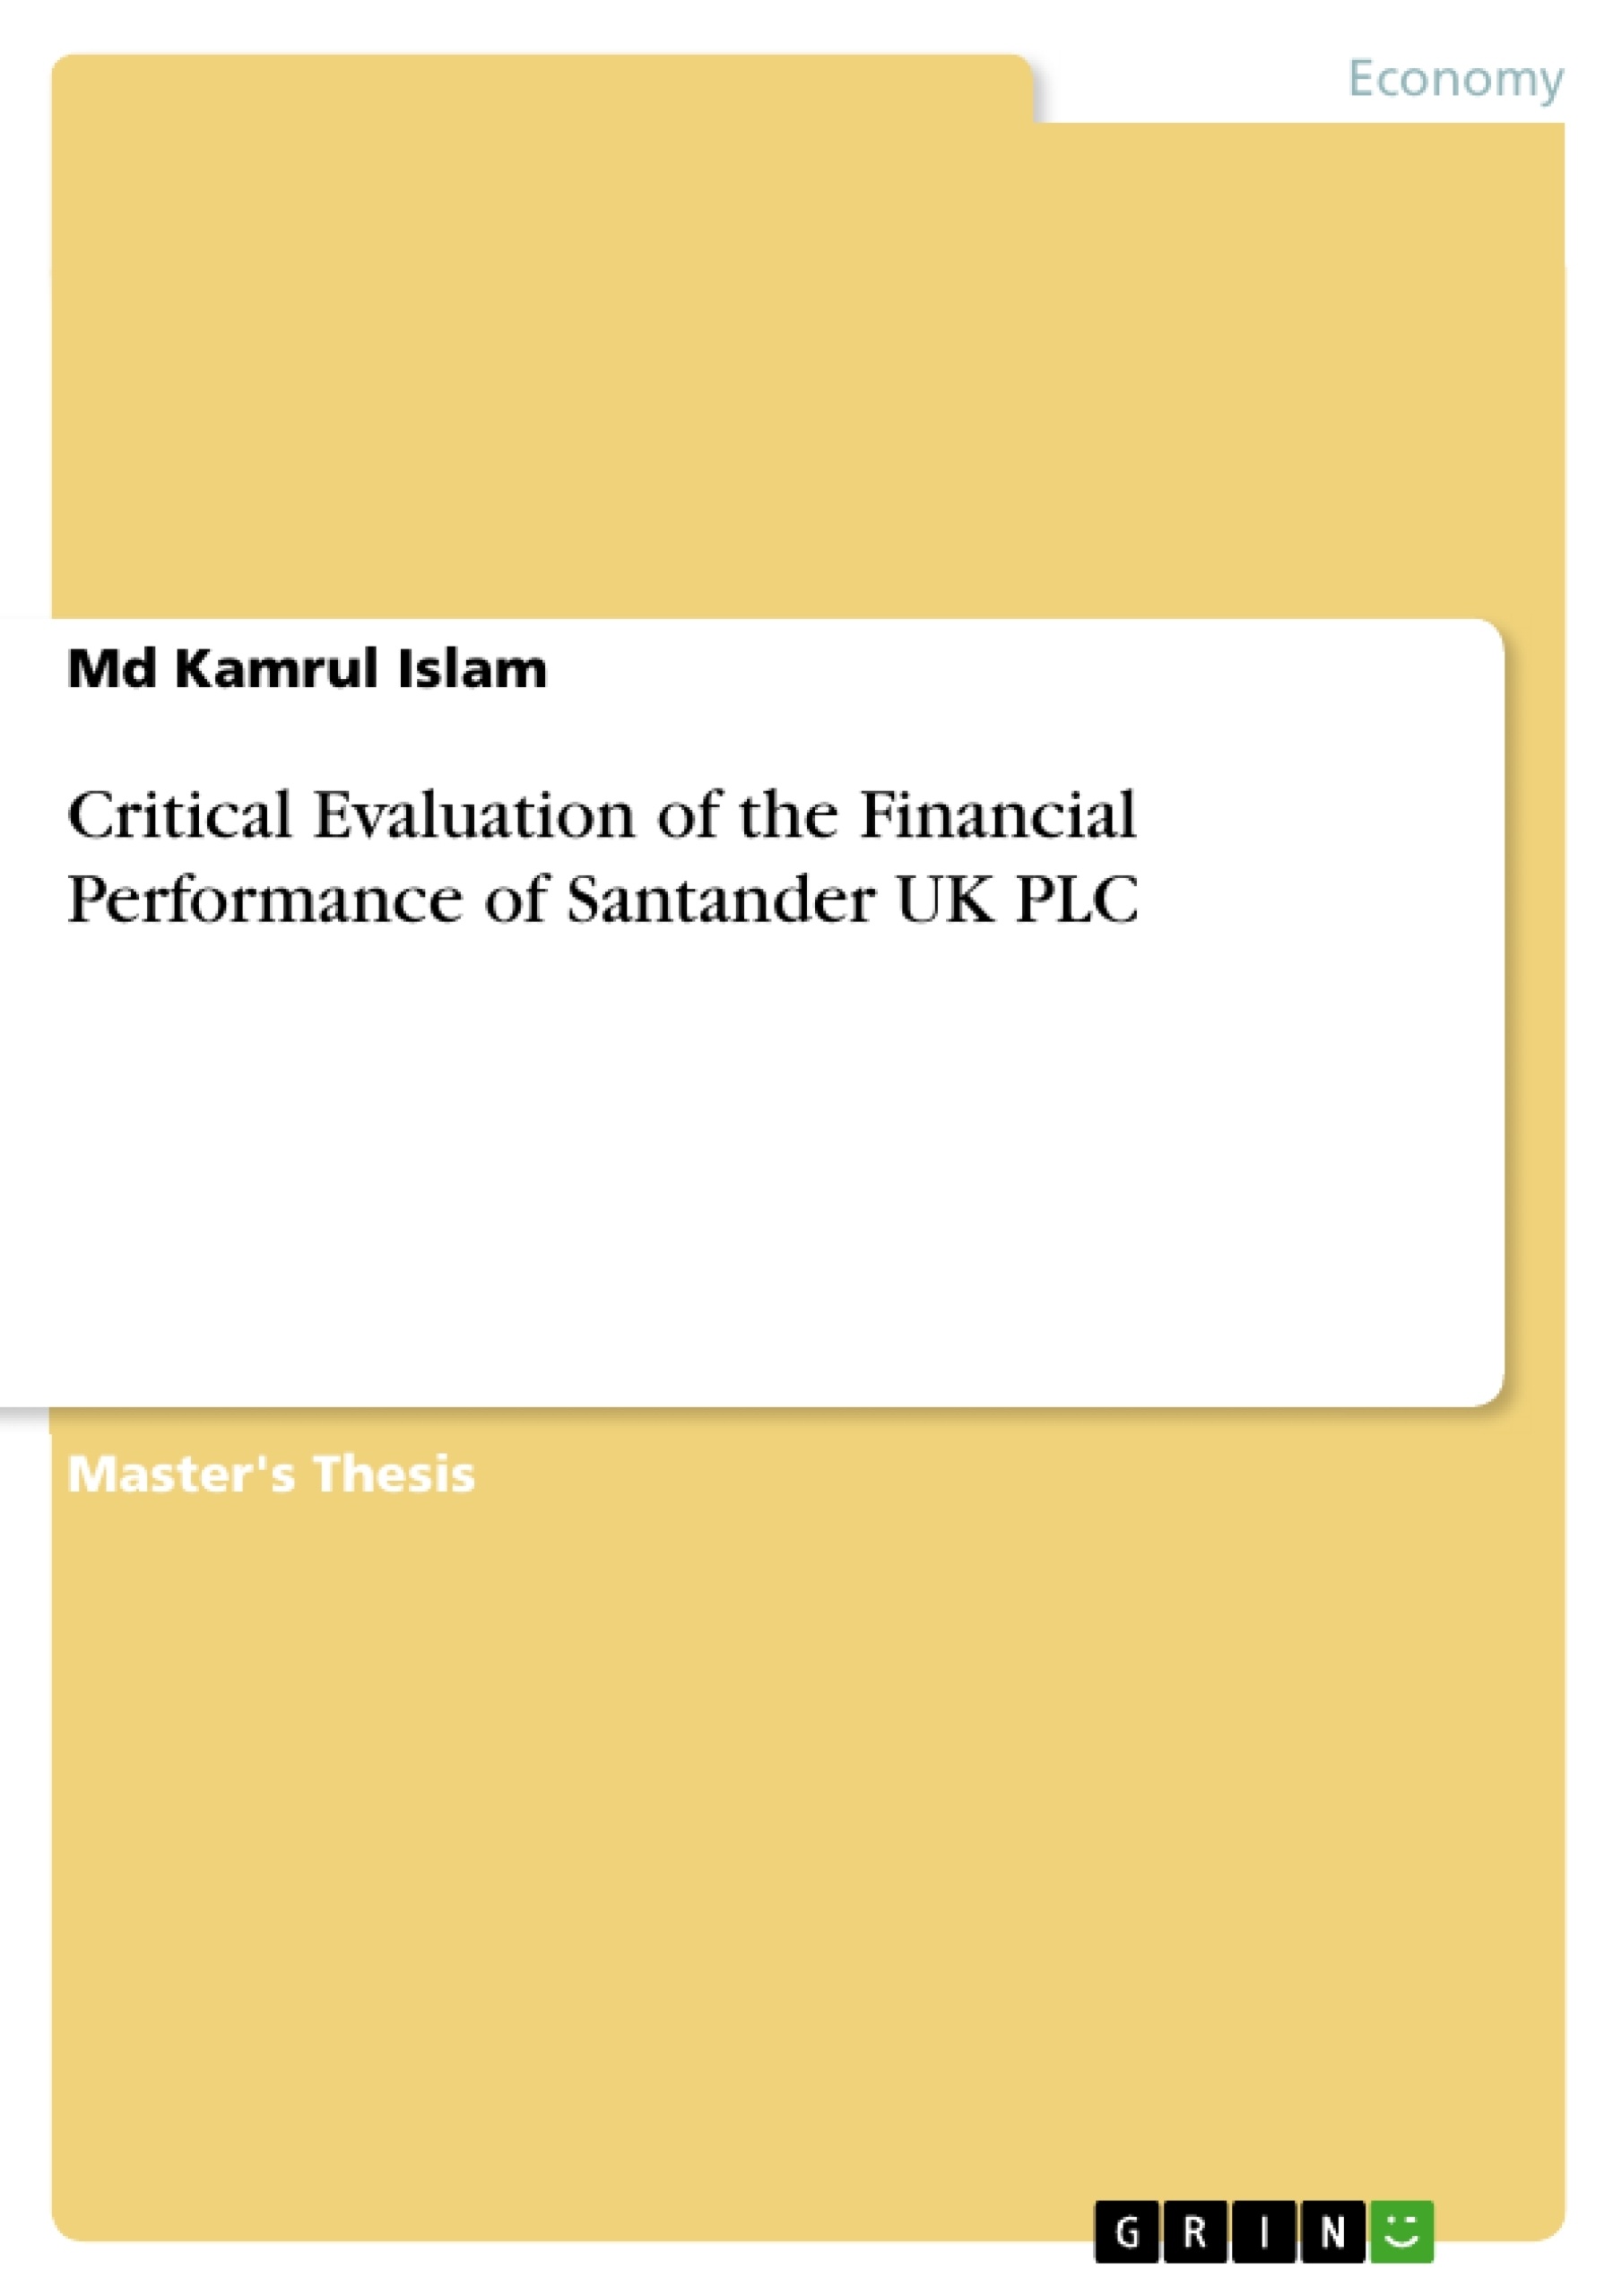 Título: Critical Evaluation of the Financial Performance of Santander UK PLC